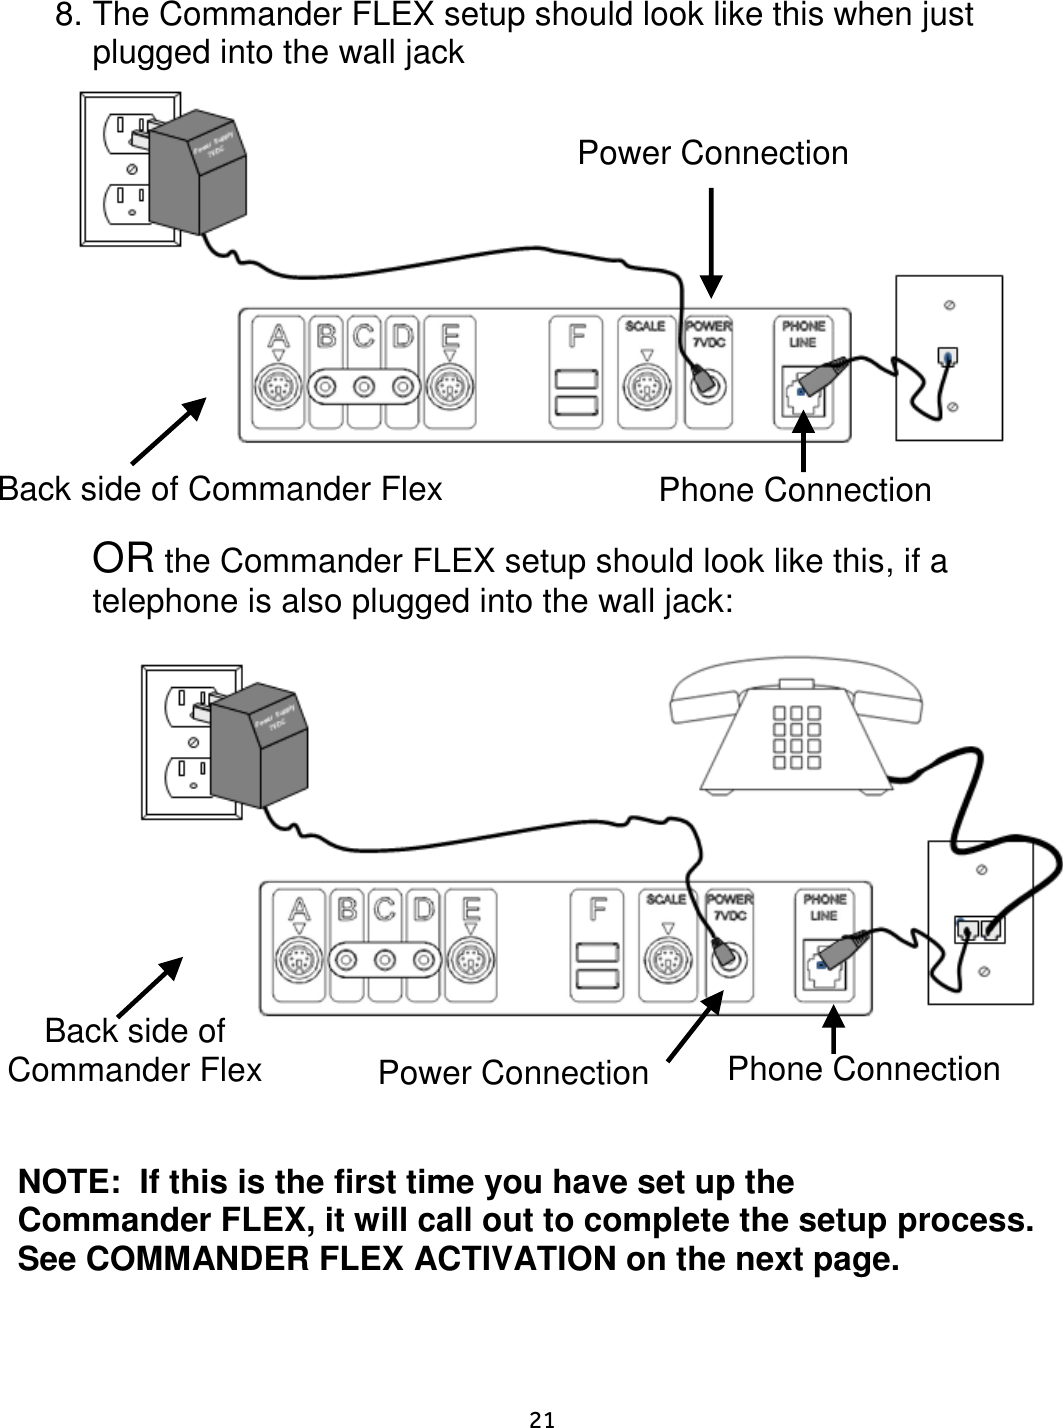     21  8. The Commander FLEX setup should look like this when just plugged into the wall jack    OR the Commander FLEX setup should look like this, if a telephone is also plugged into the wall jack:                NOTE:  If this is the first time you have set up the Commander FLEX, it will call out to complete the setup process.  See COMMANDER FLEX ACTIVATION on the next page. Back side of Commander Flex  Power Connection  Phone Connection  Power Connection  Back side of Commander Flex  Phone Connection  